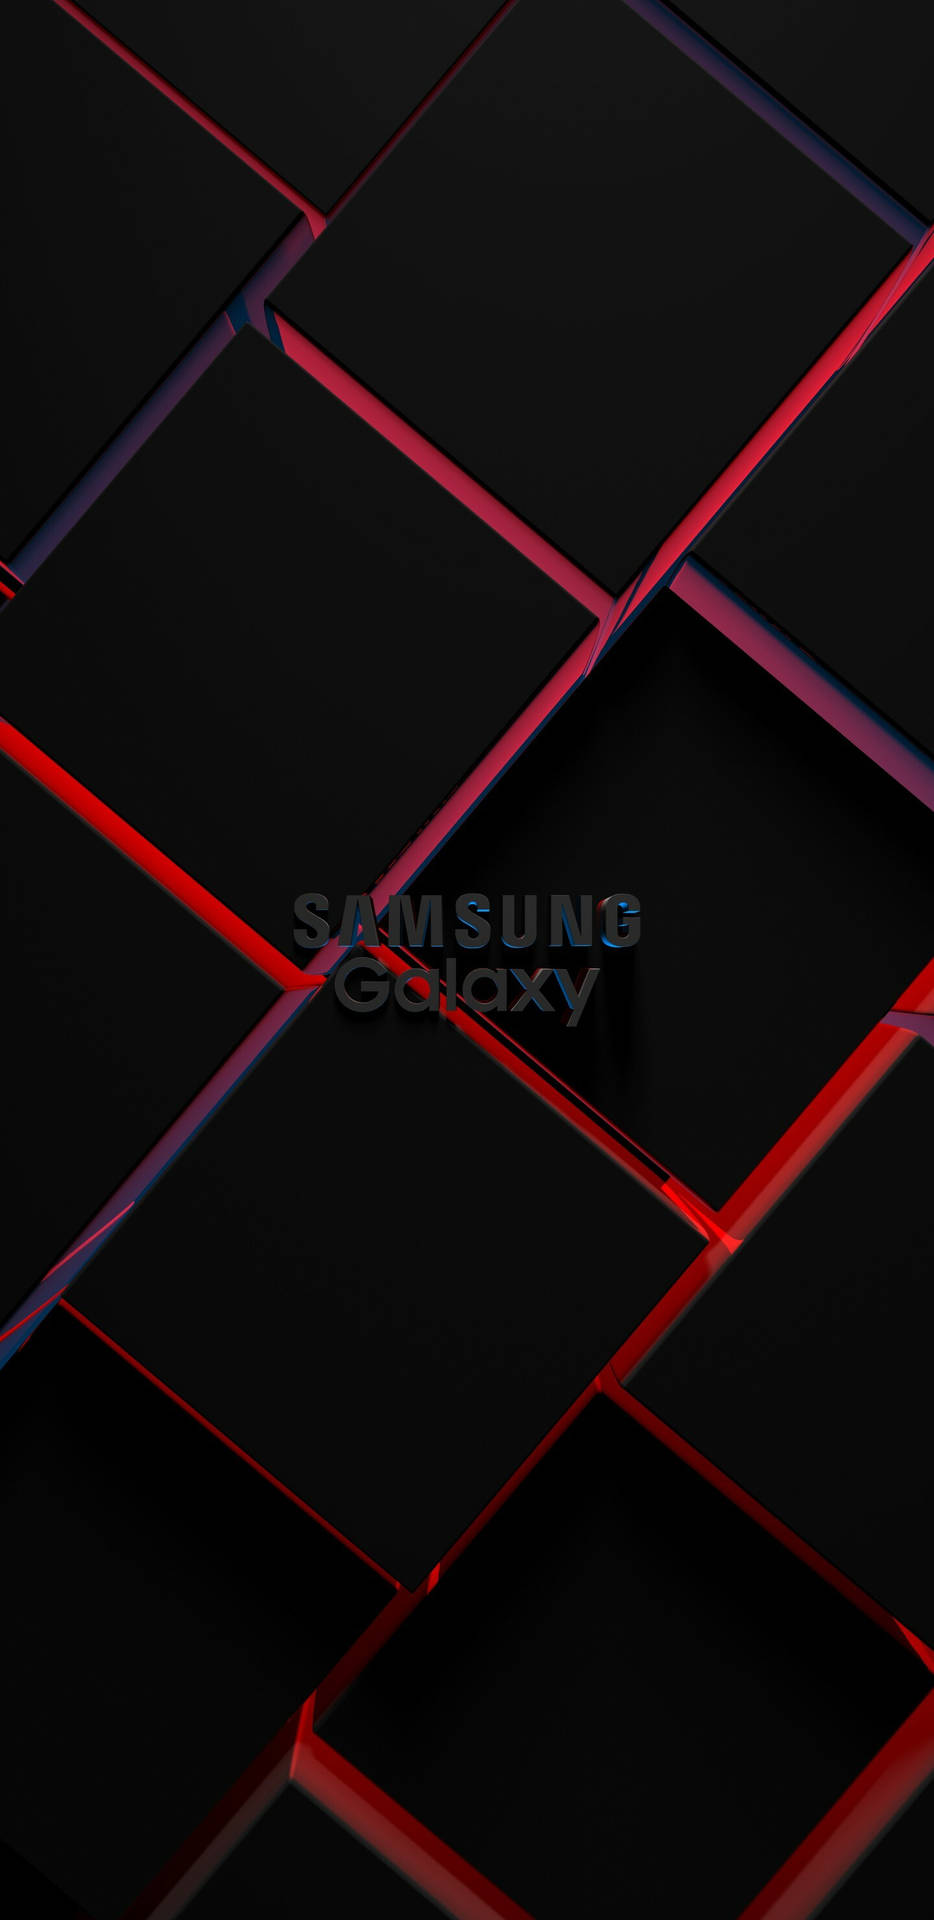 Samsung Galaxy Red And Black Background